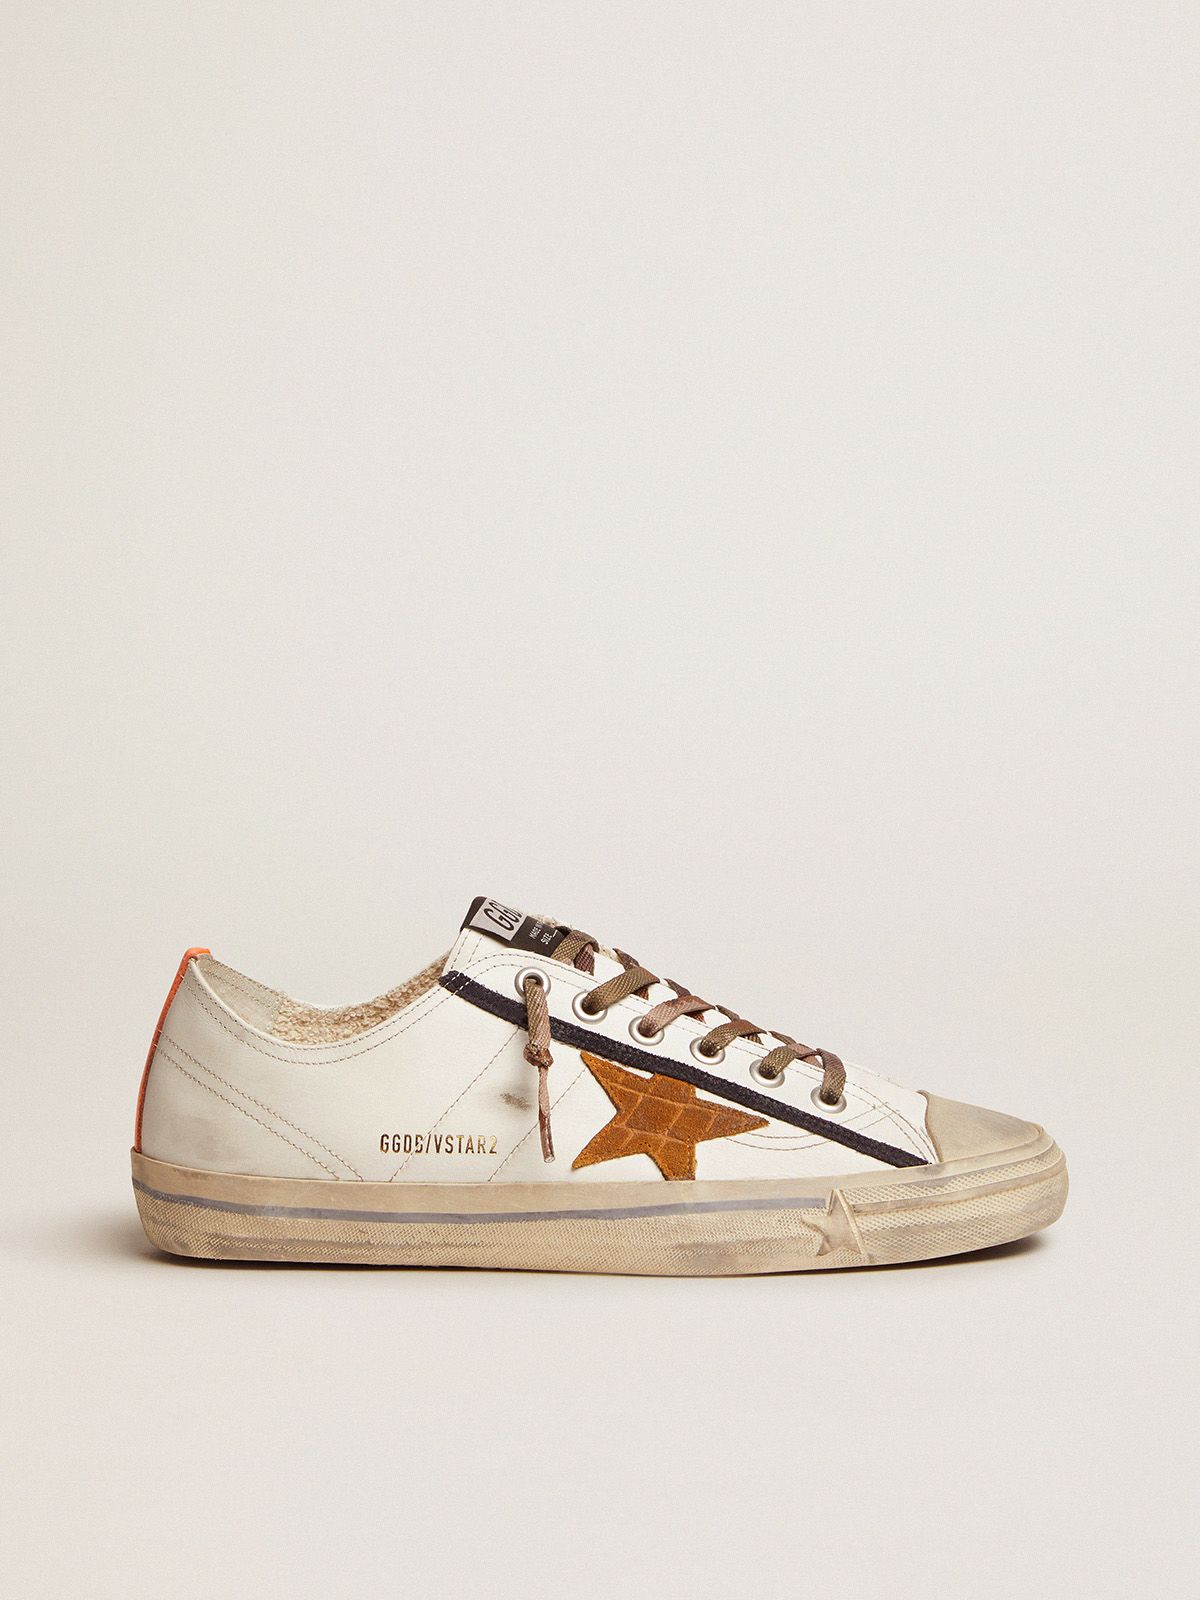 V-Star LTD sneakers in white leather with crocodile-print suede star | 